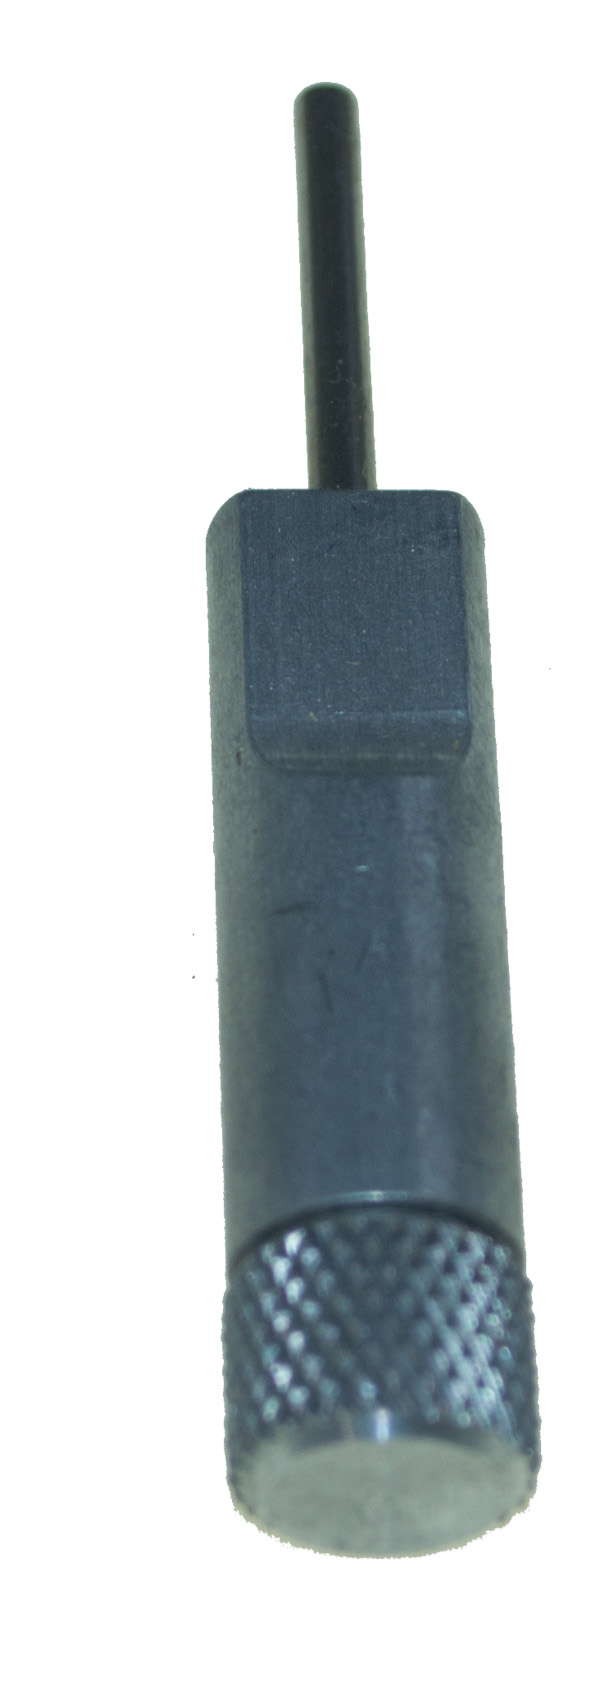 Amp Pin Removal Tool